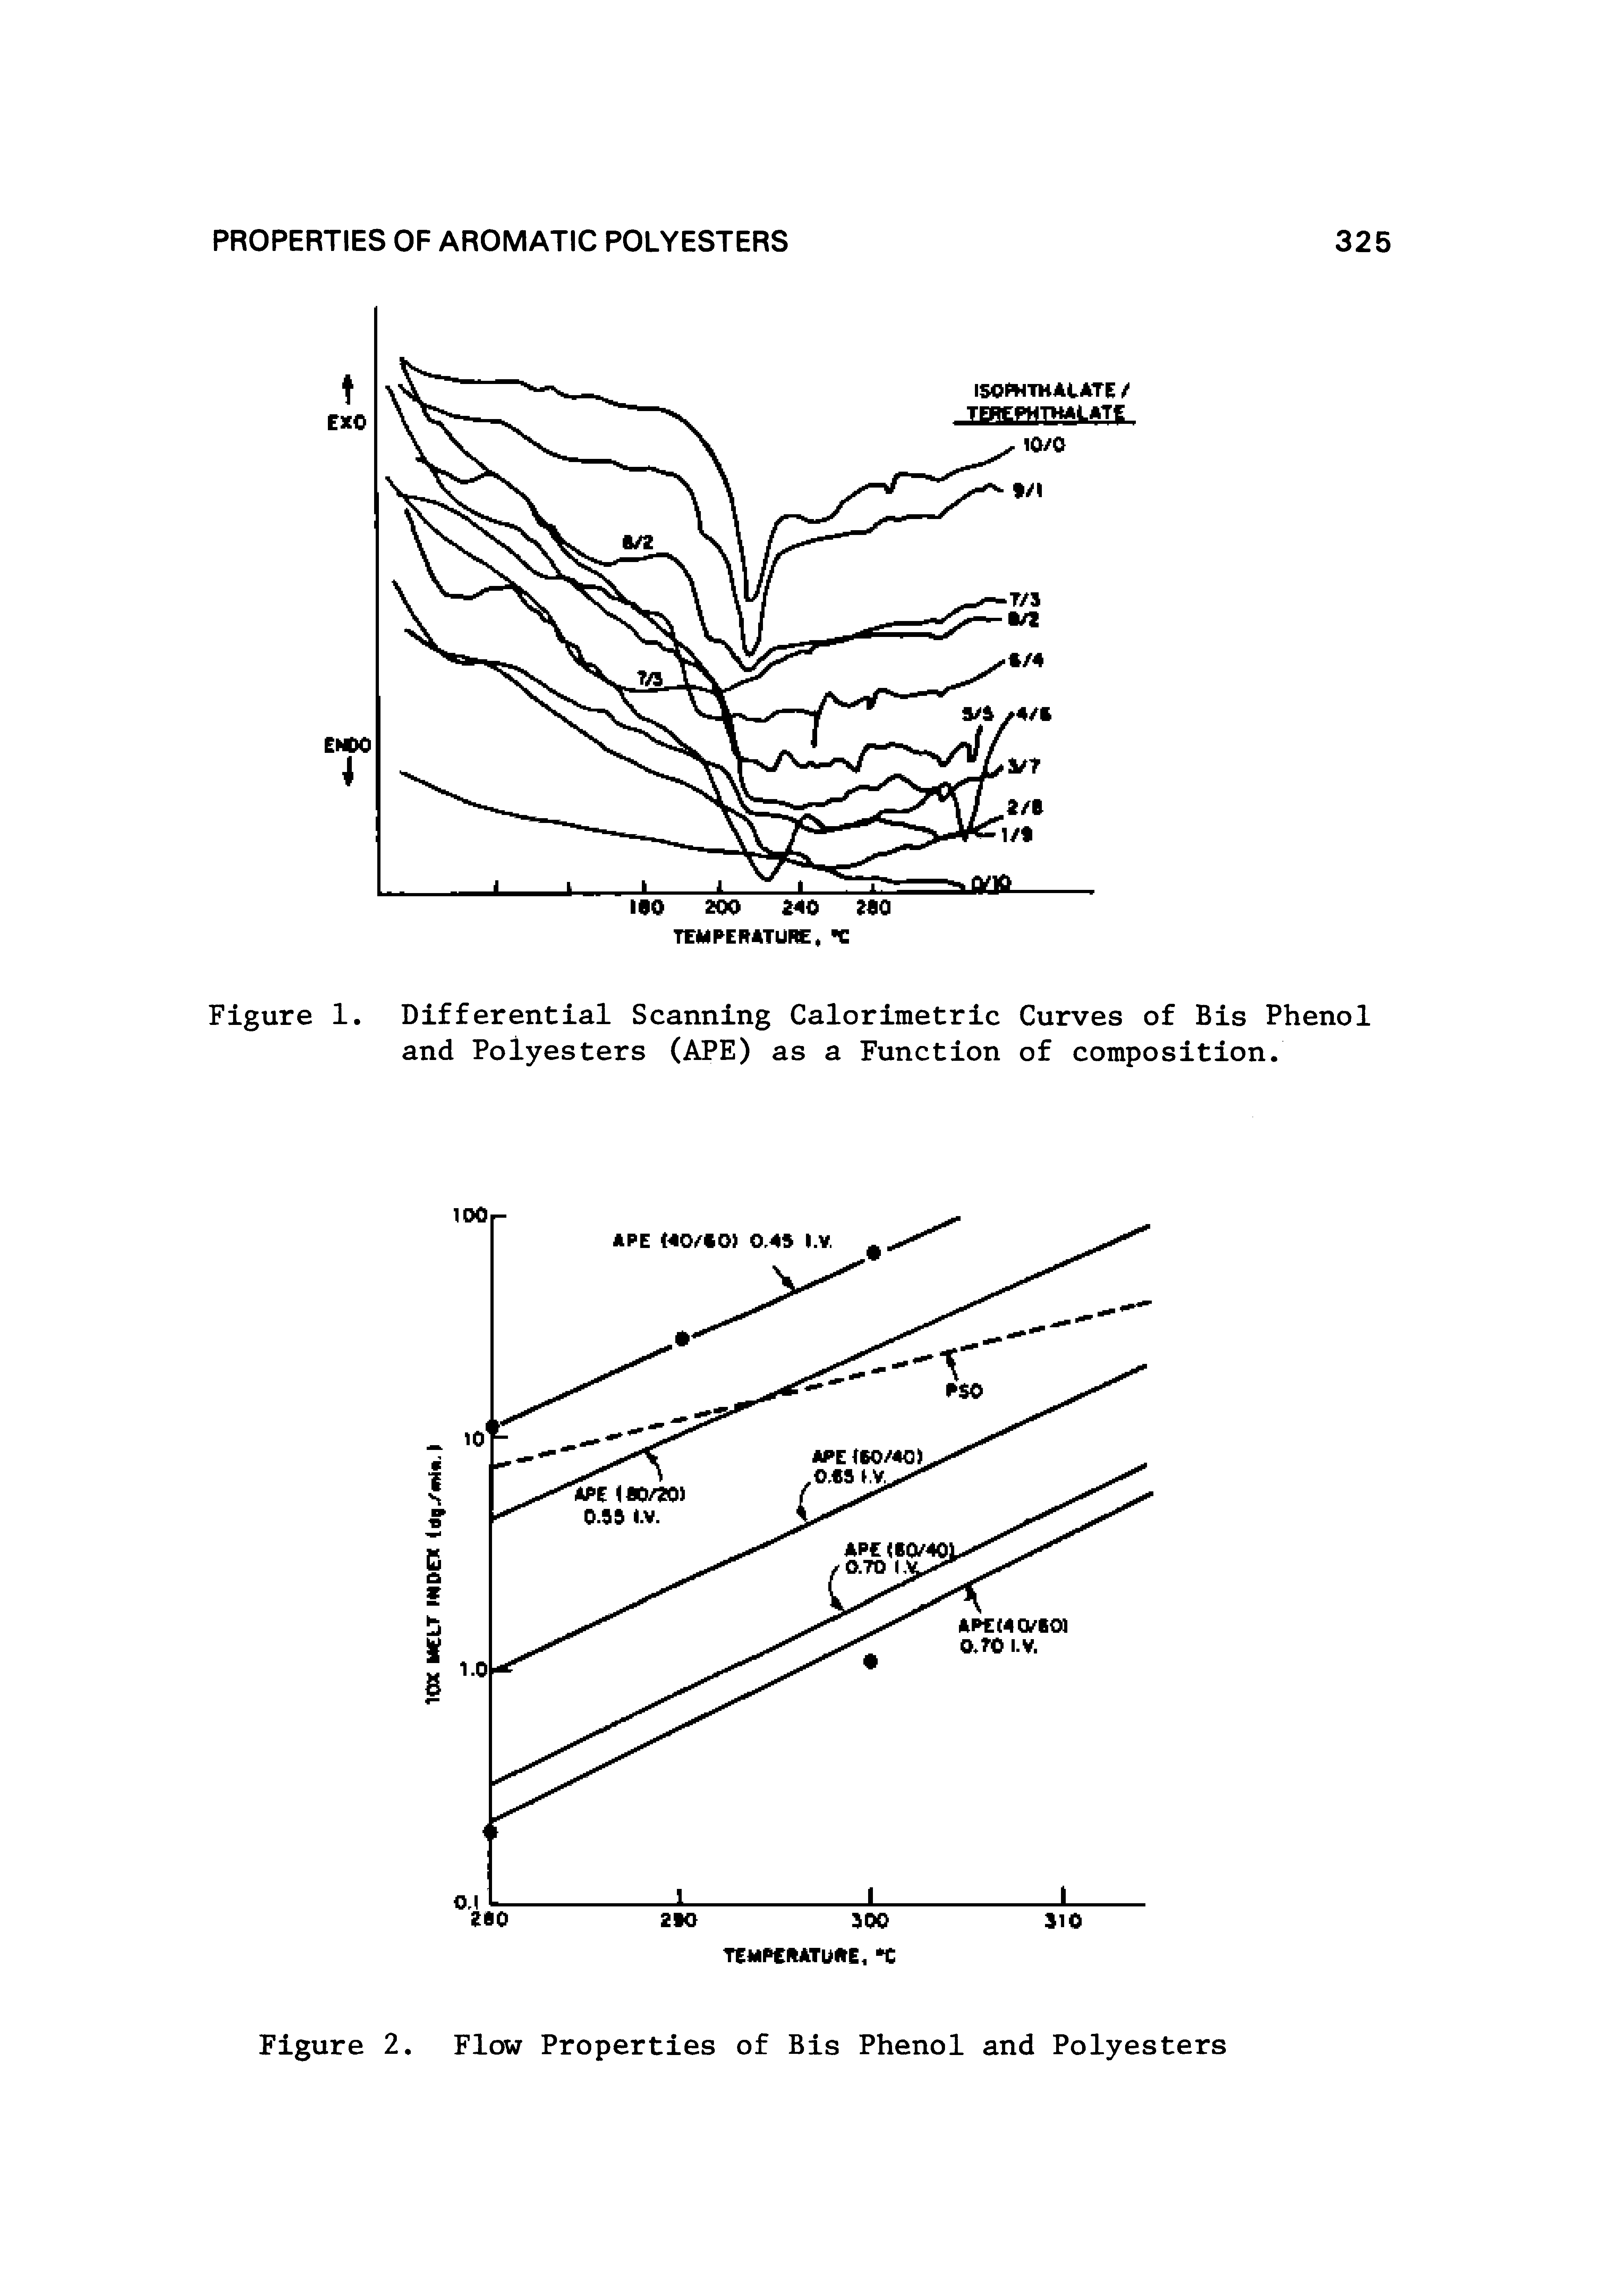 Figure 1. Differential Scanning Calorimetric Curves of Bis Phenol and Polyesters (APE) as a Function of composition.